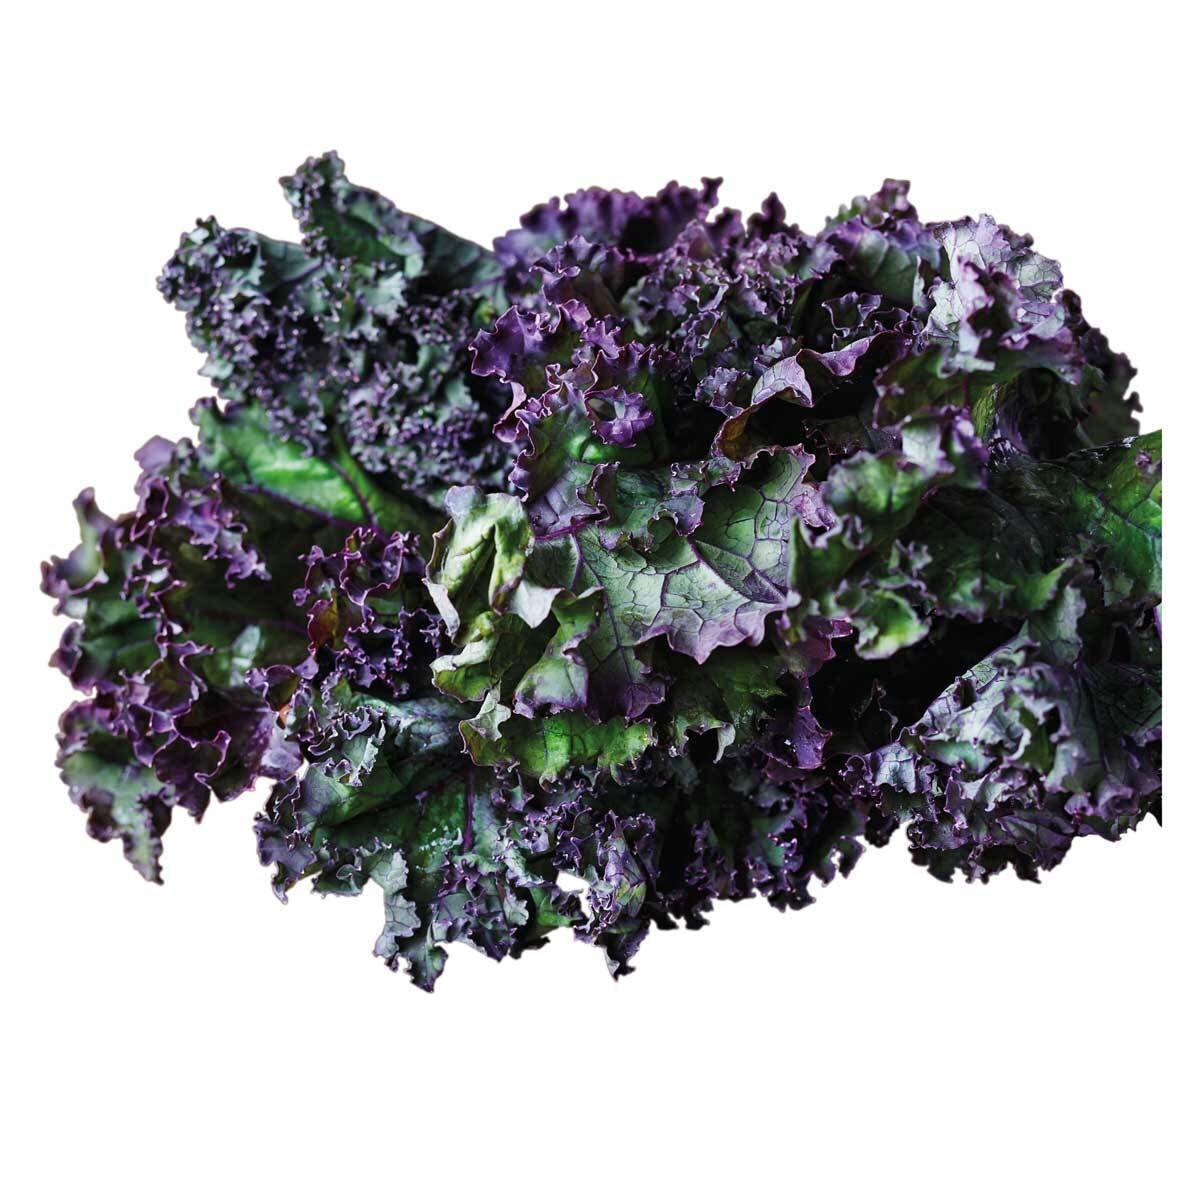 Red Curly Kale